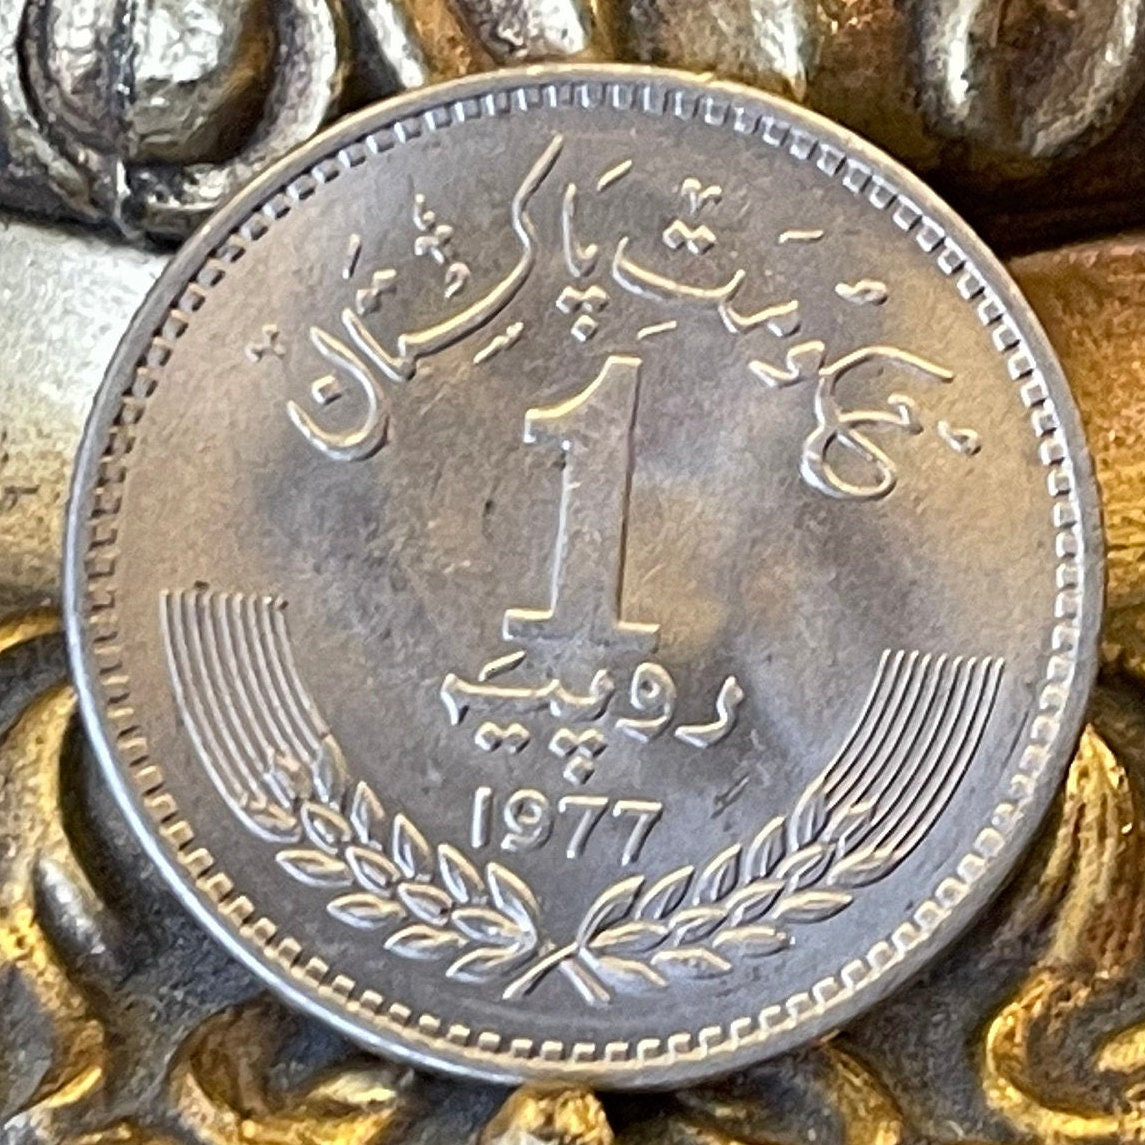 Allama Muhammad Iqbal 1 Rupee Pakistan Authentic Coin Money for Jewelry and Craft Making (1977) (Urdu Poetry)